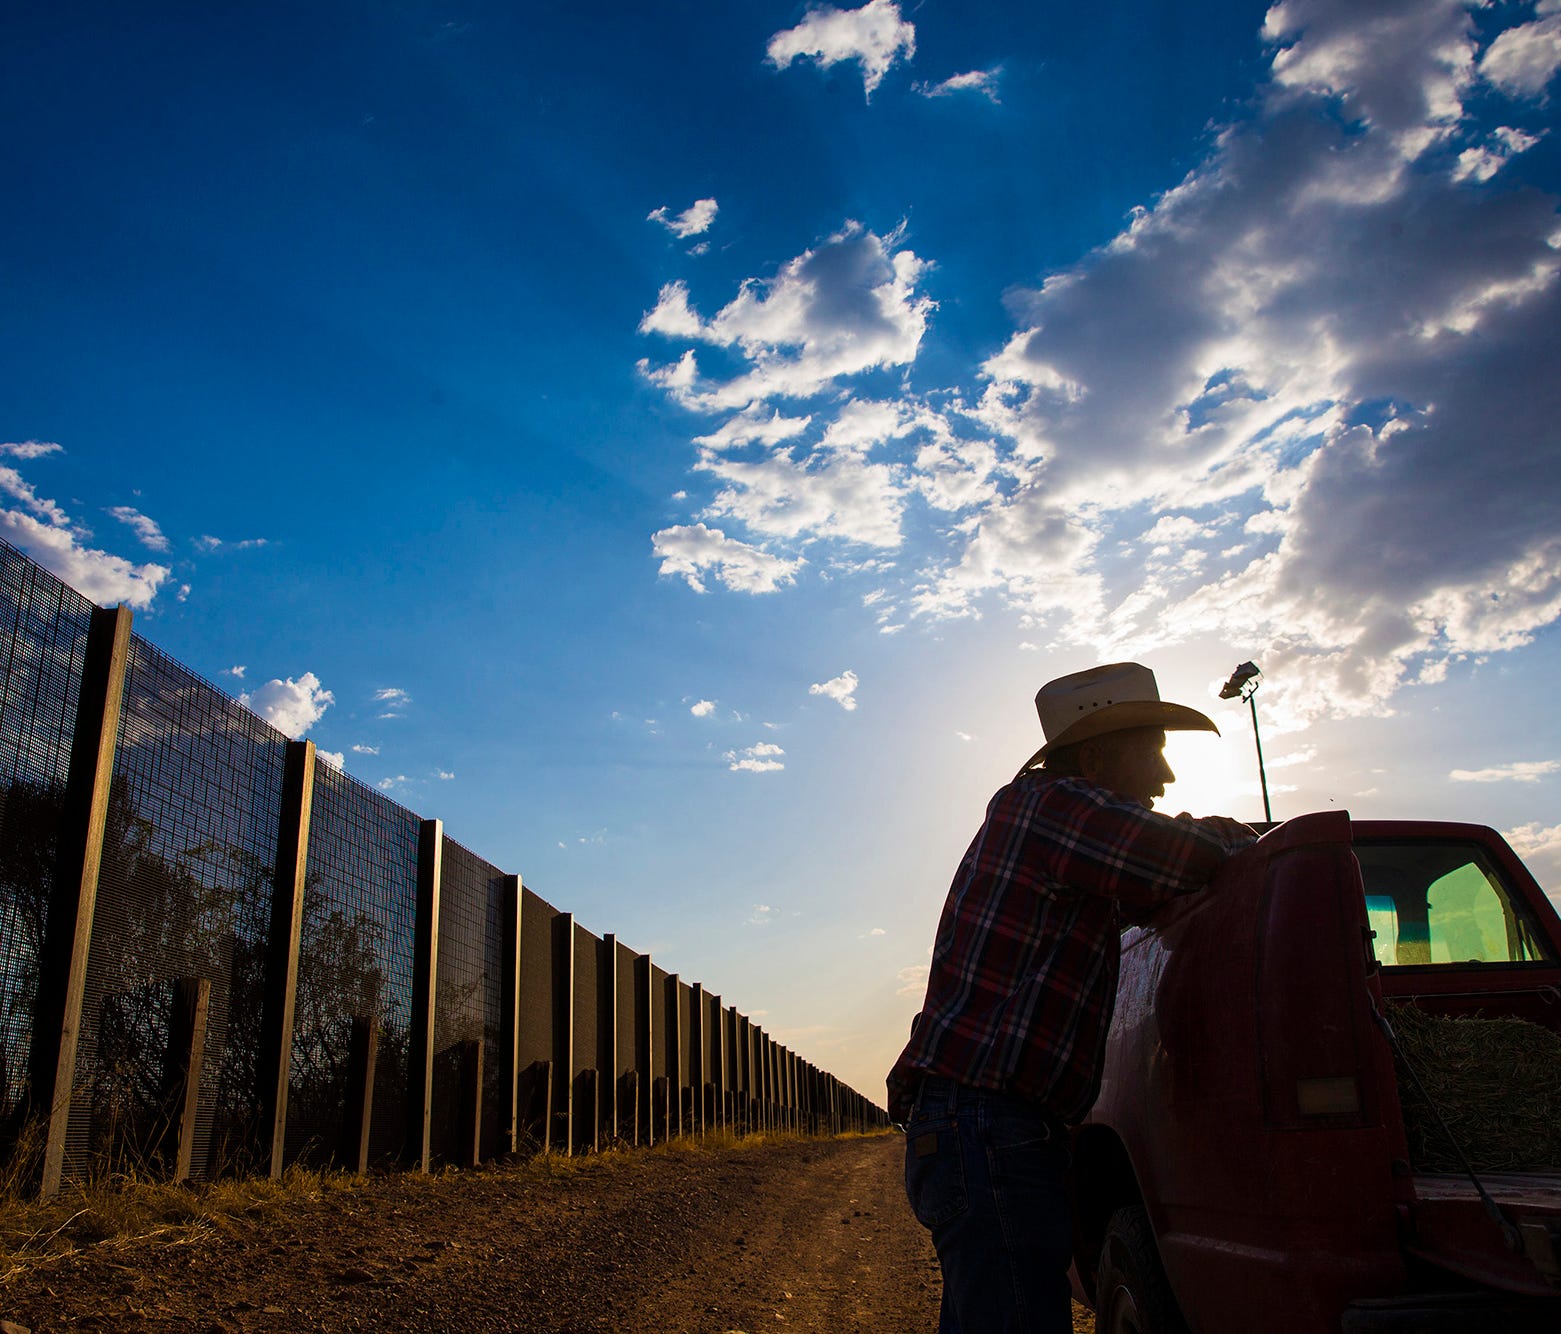 May 5, 2017; Naco, Ariz, USA; Rancher John Ladd leans on his truck on his ranch, which borders with Mexico (behind him). He has been frustrated for years over the illegal border crossers and drug smugglers that cut through his ranch. The 16,000 acre 